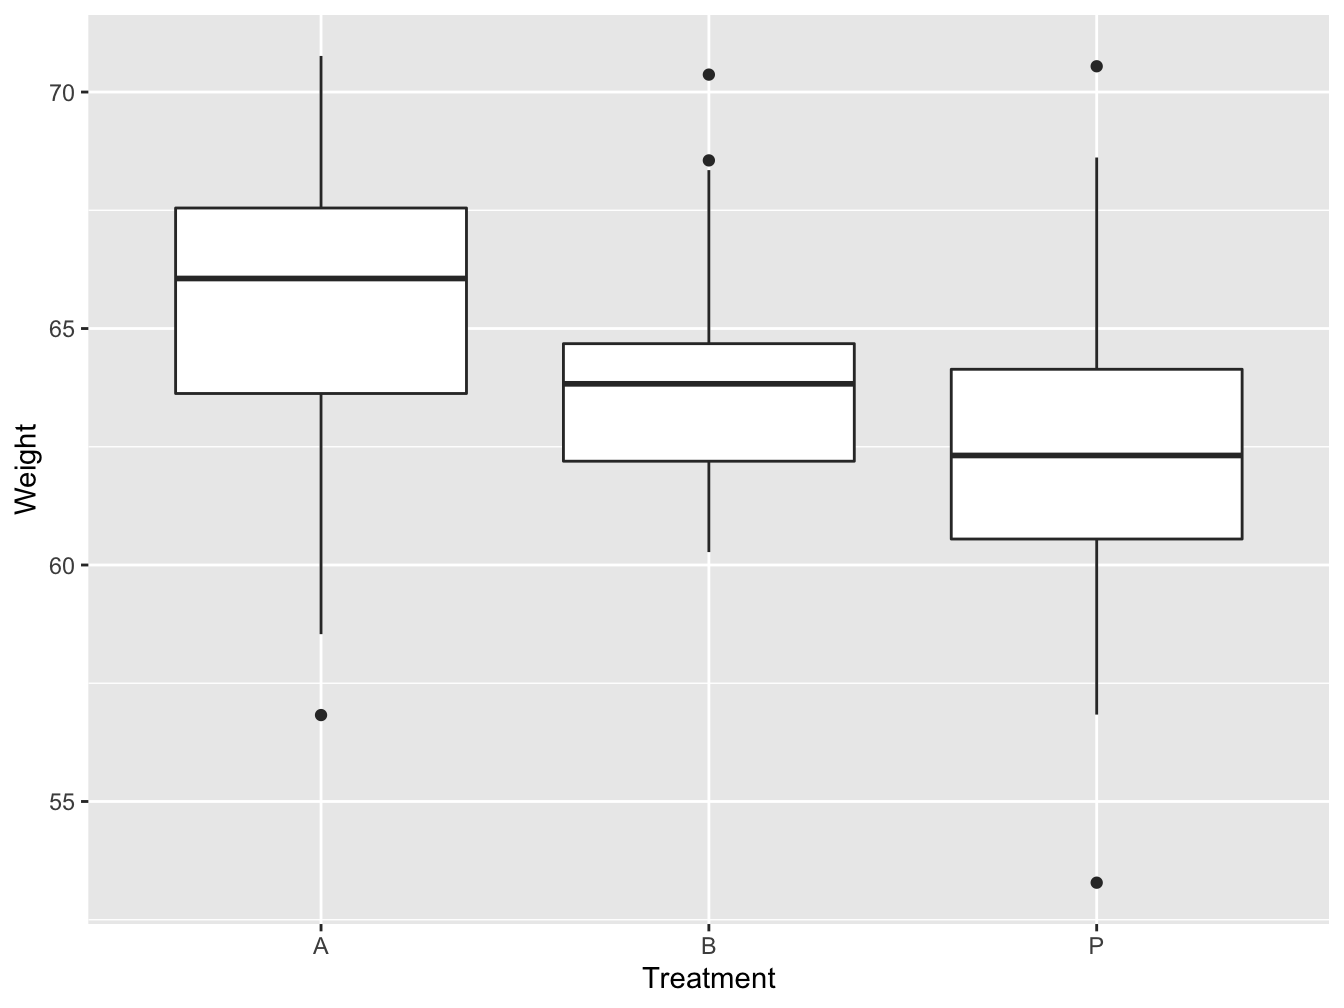 Boxplot and whisker plot of the effect of different treatments on gain weight